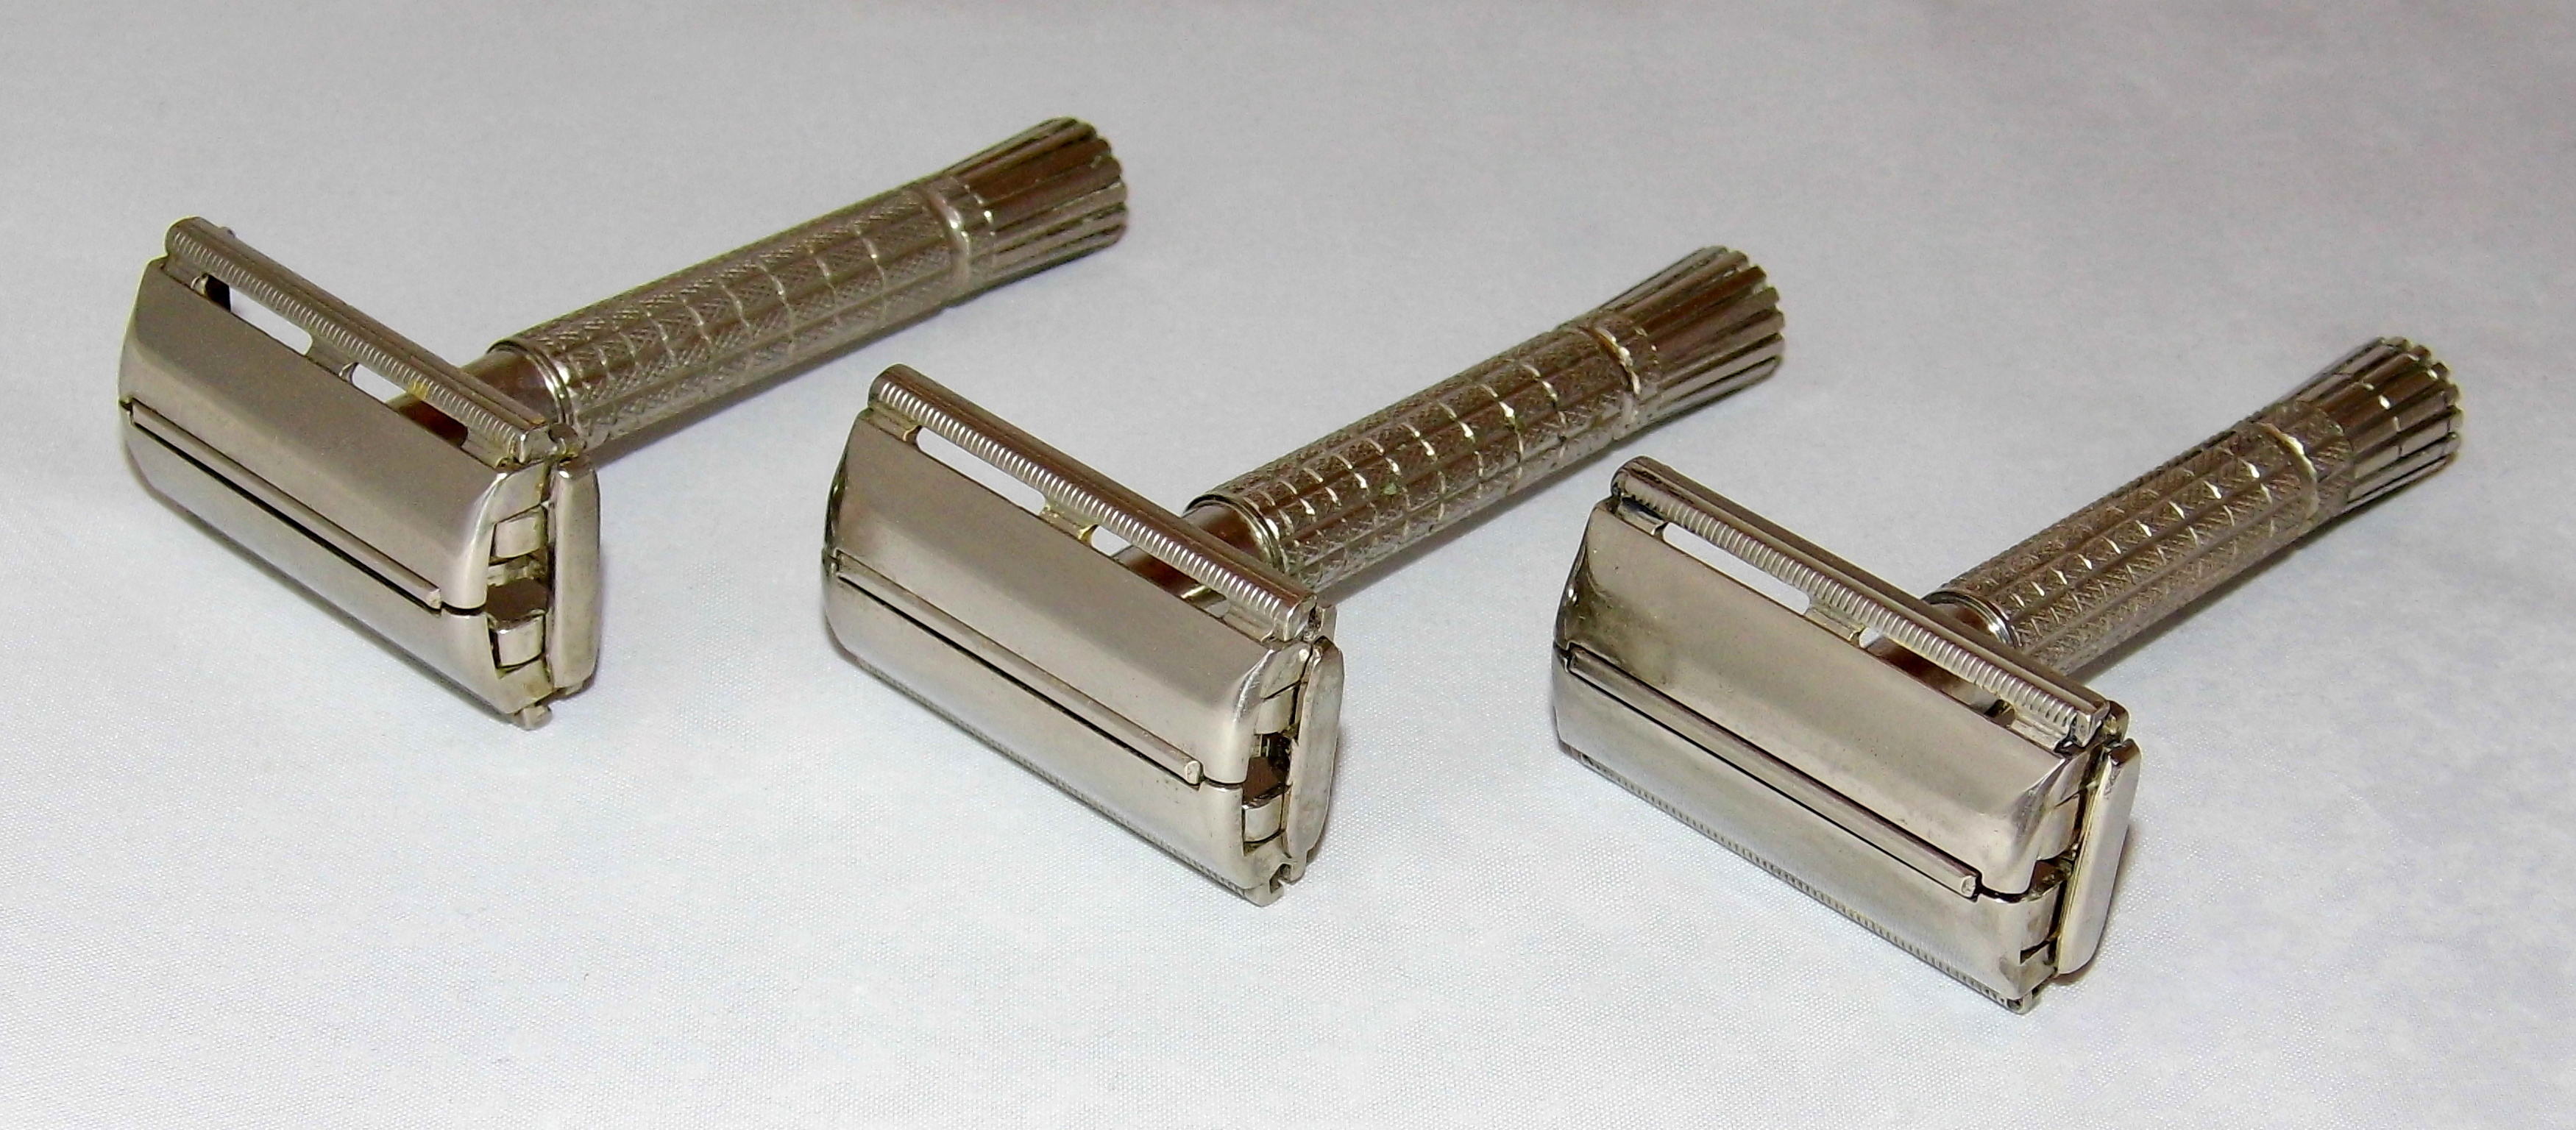 File:Three Vintage Gillette Flare Tip Super Speed Safety Razors, Double Edge,  Twist To Open, Made In USA, Dated 1954 (Z-3), 1962 (H-1) And 1963 (I-1)  (29271759830).jpg - Wikimedia Commons